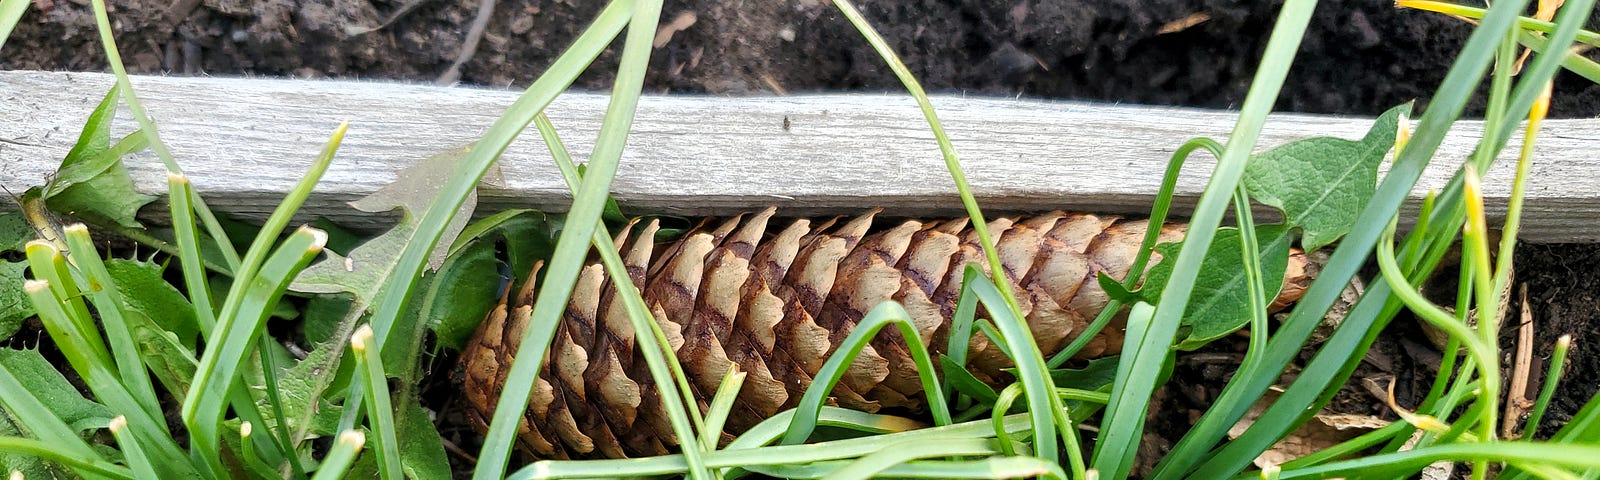 A pine cone rests among fresh green grass-like leaves, partly obscured by the surrounding blades. Small purple flowers nestle in the leaves. In the background, a patch of soil is visible next to a wooden border, suggesting a garden or landscaped area.